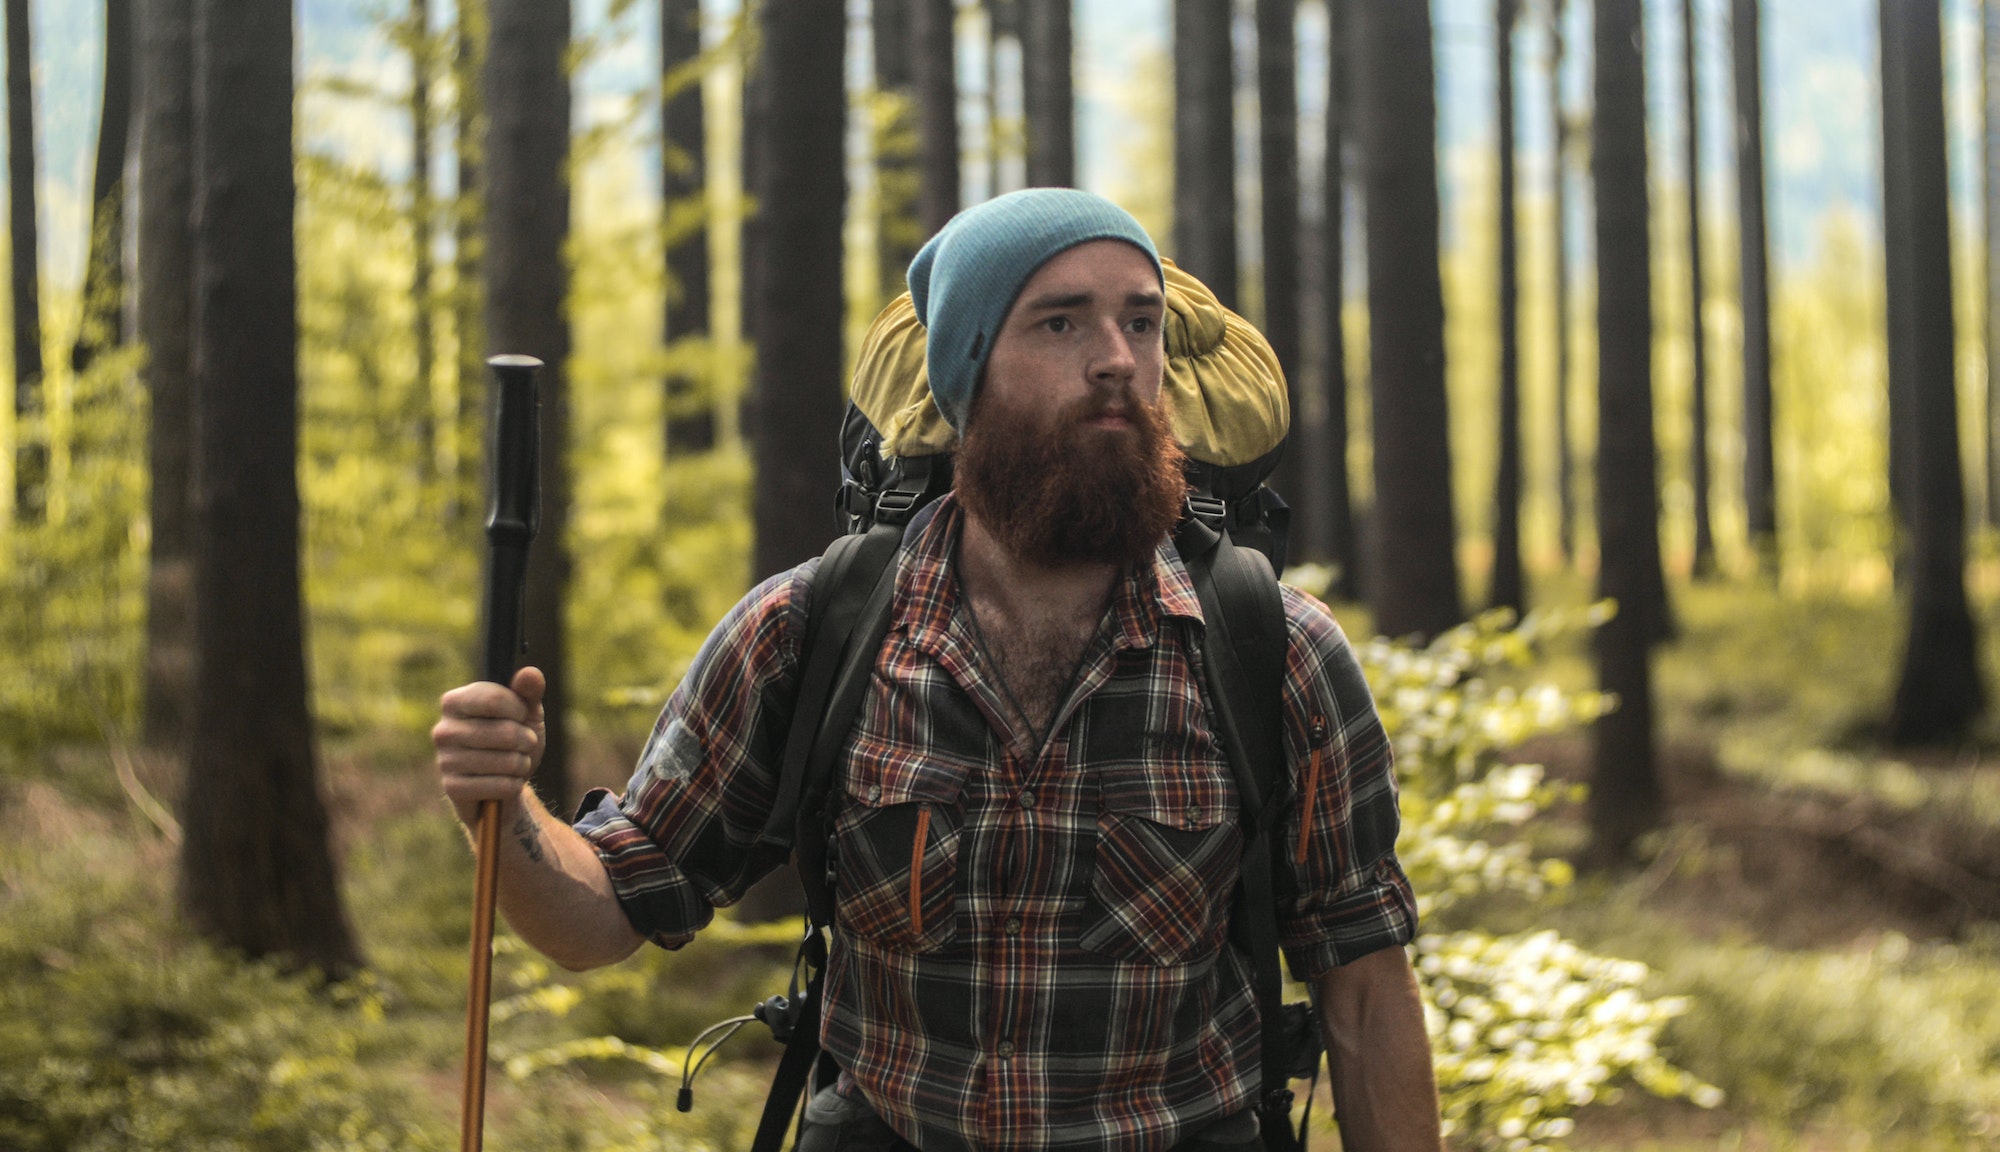 portrait of a caucasian male hiker standing outdoors in a forest with a backpack